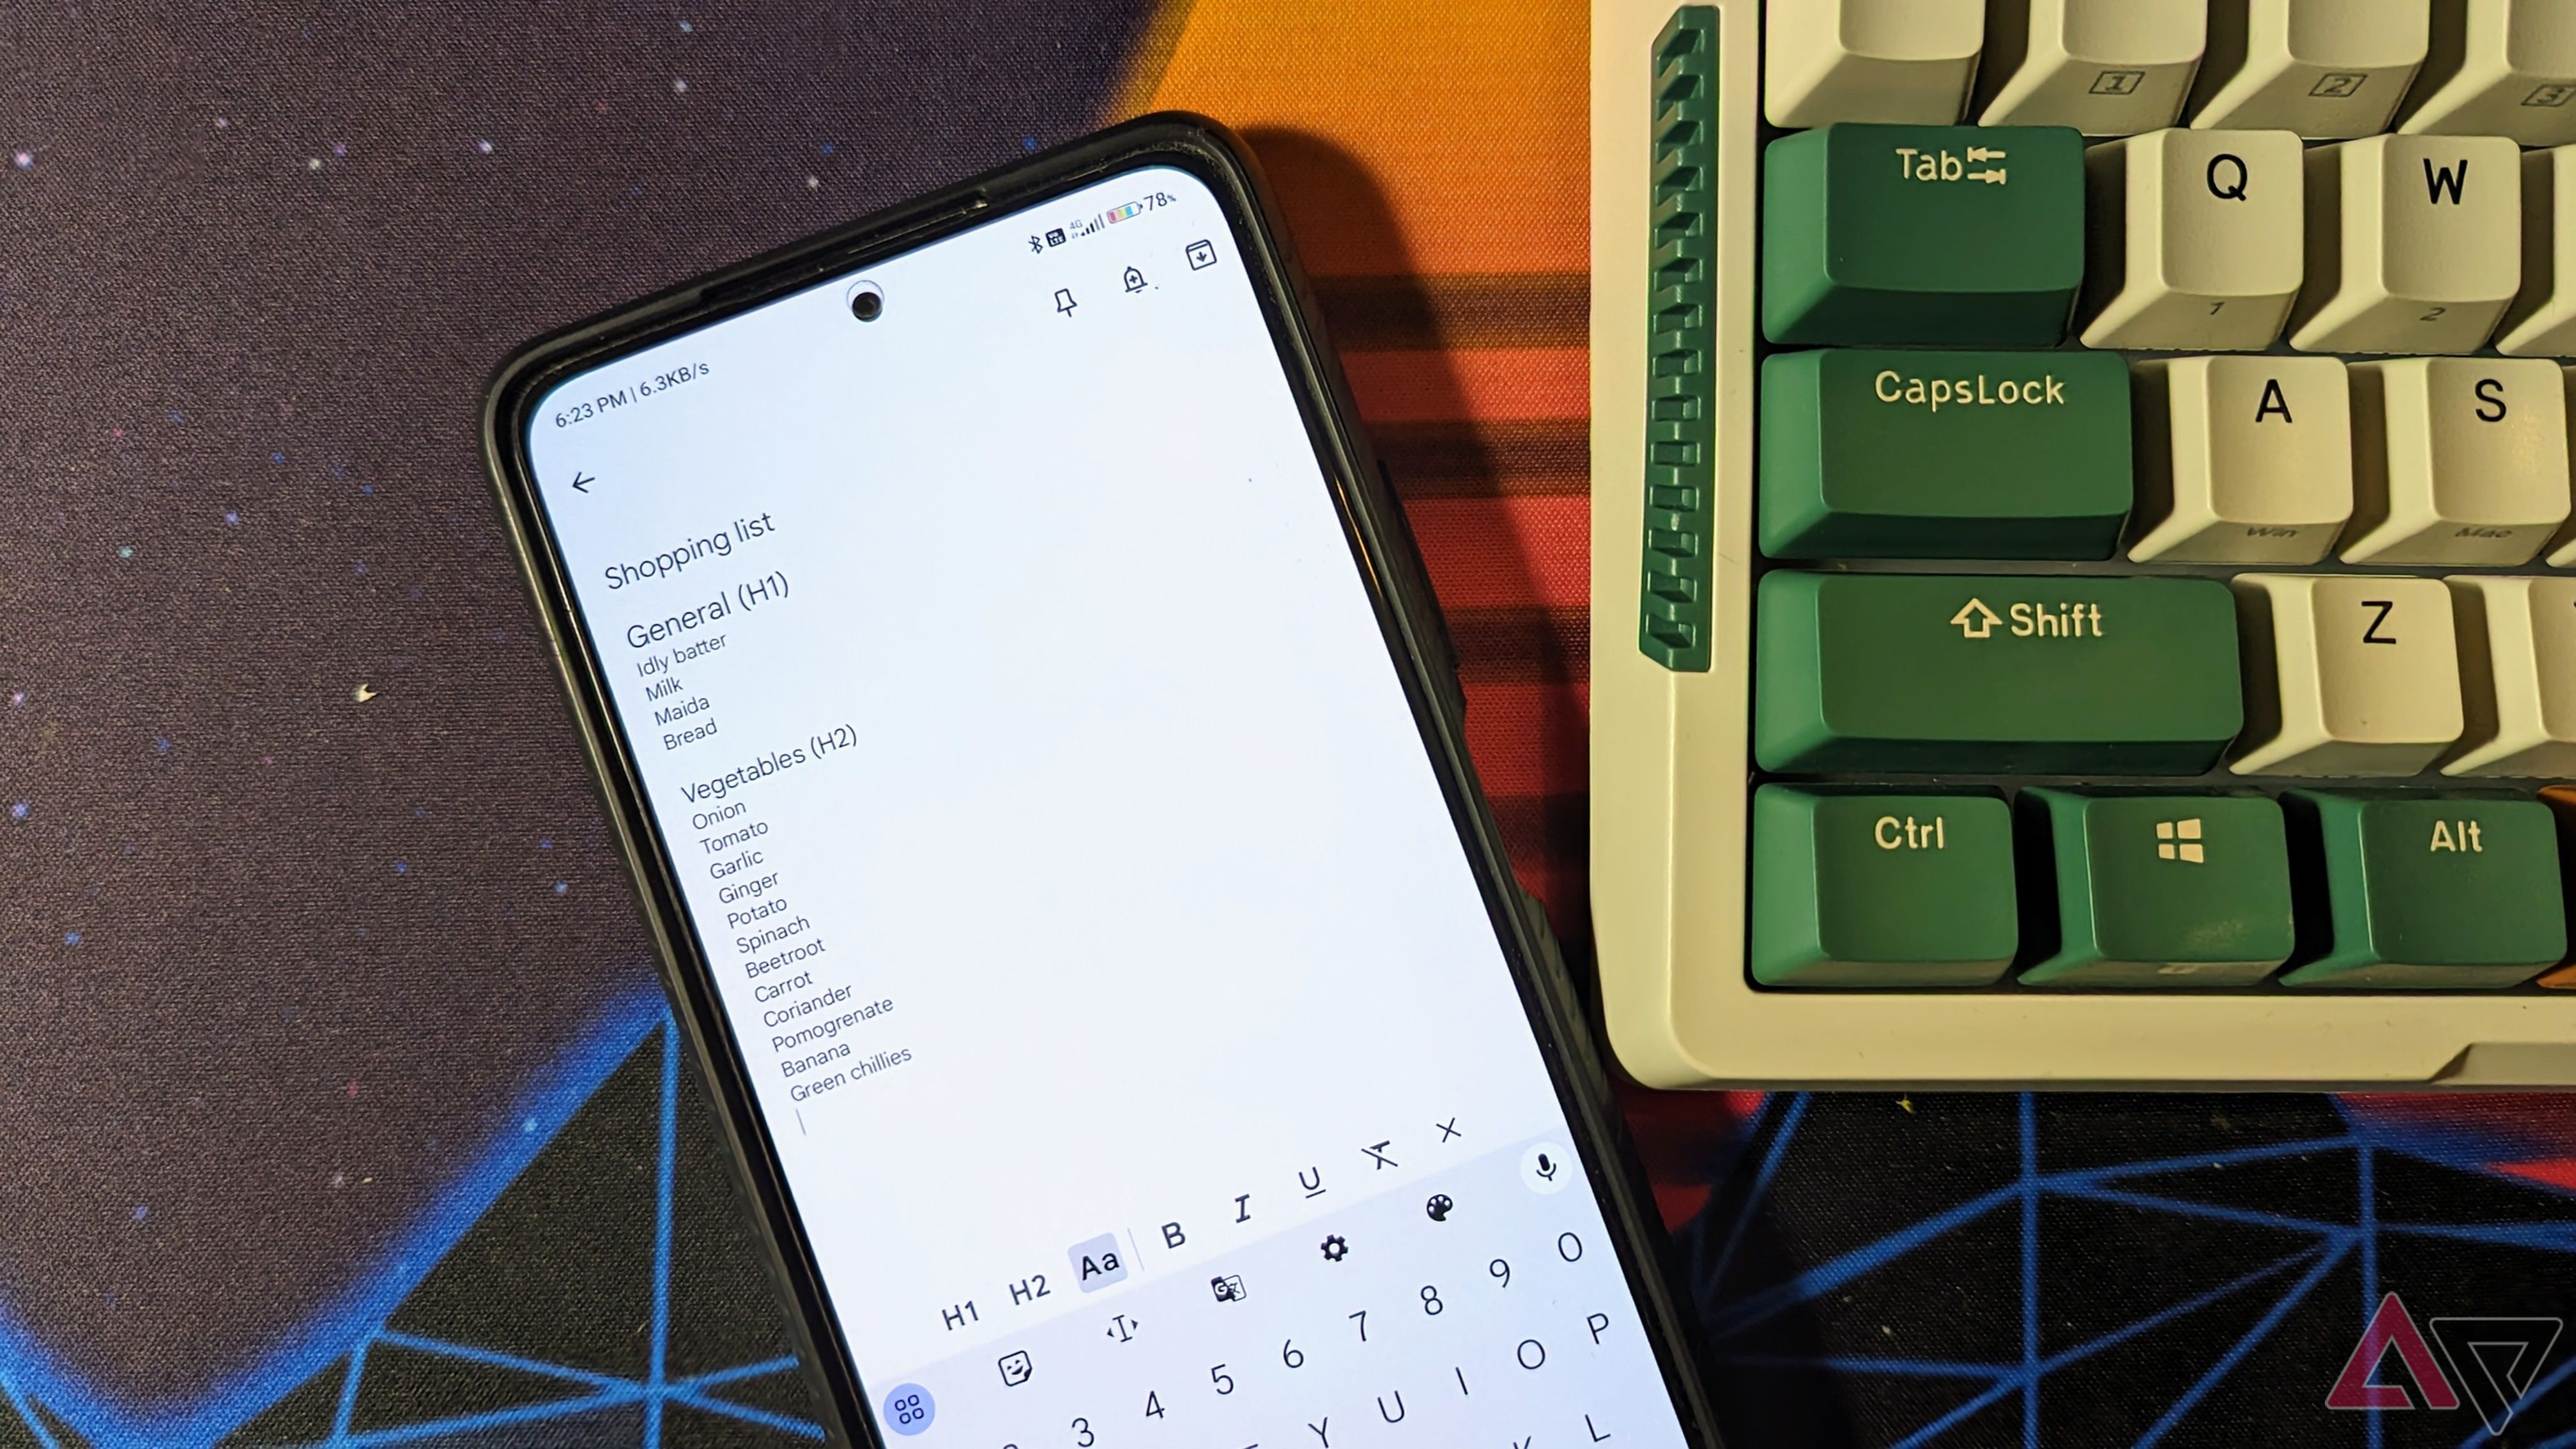 A phone displaying the Google Keep notes app sits next to a keyboard